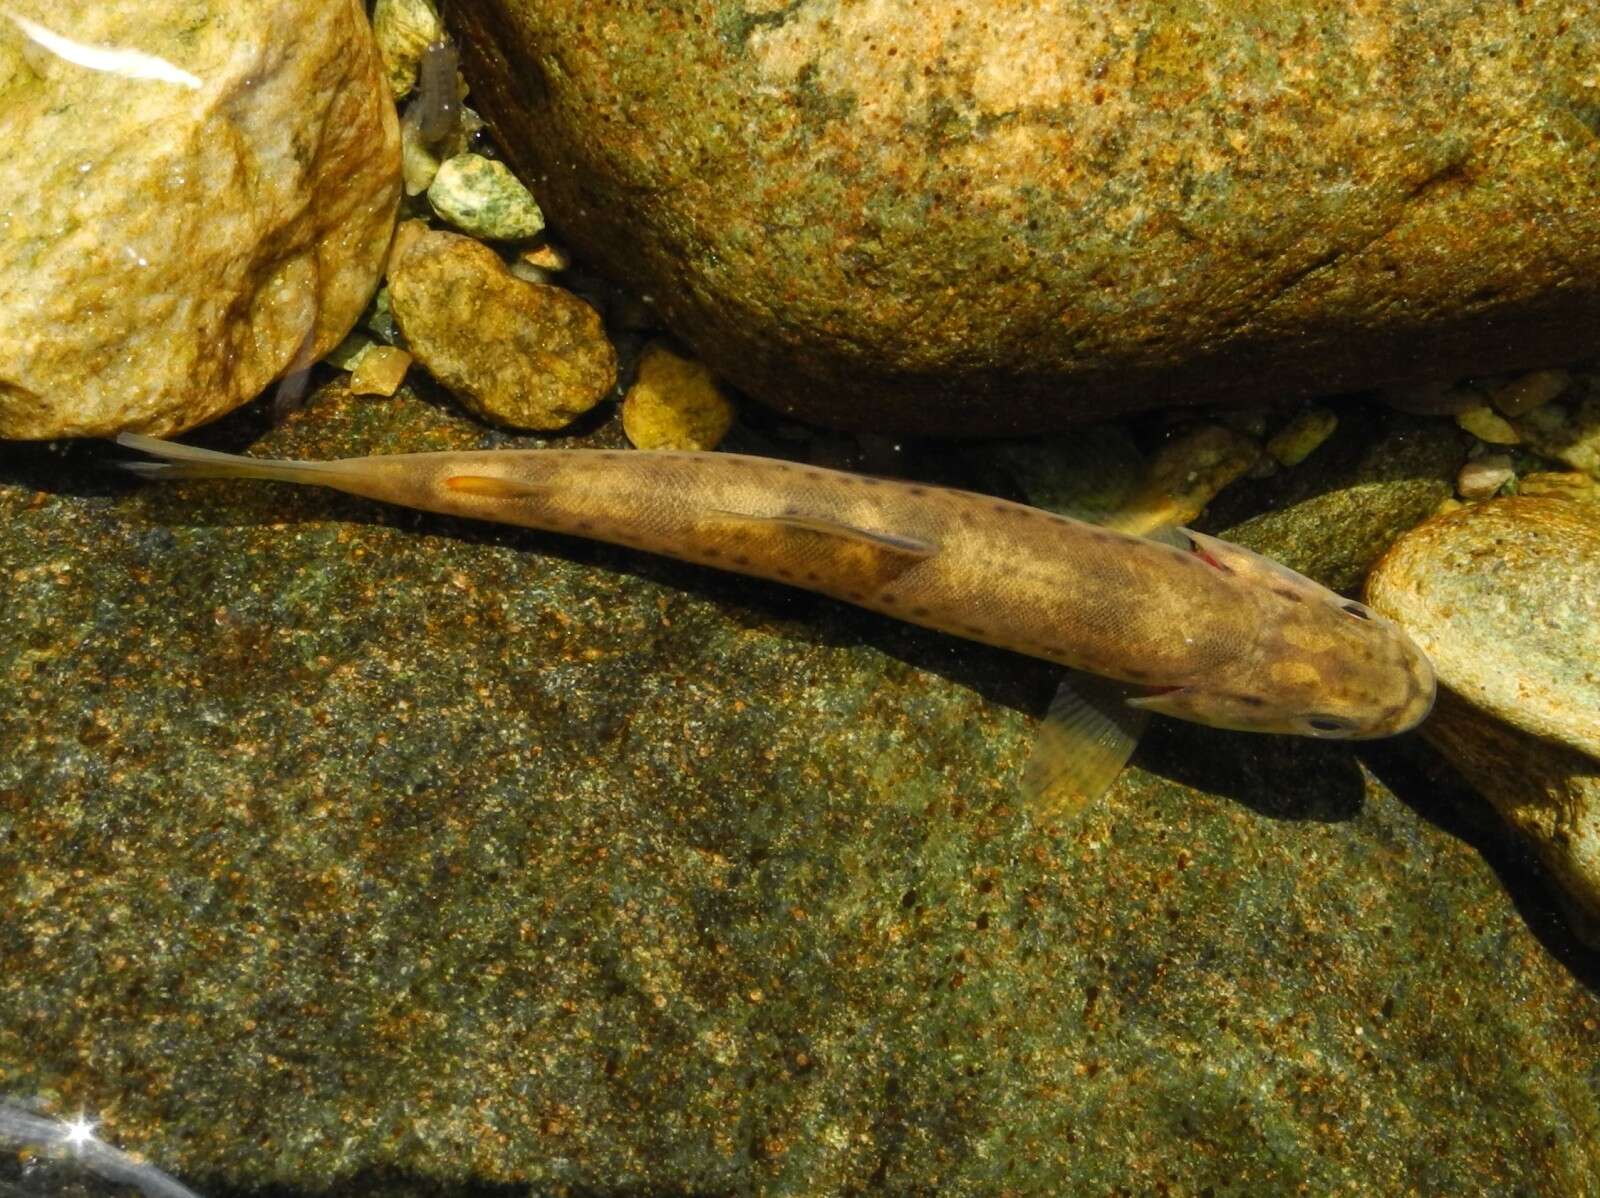 Image of Marbled trout